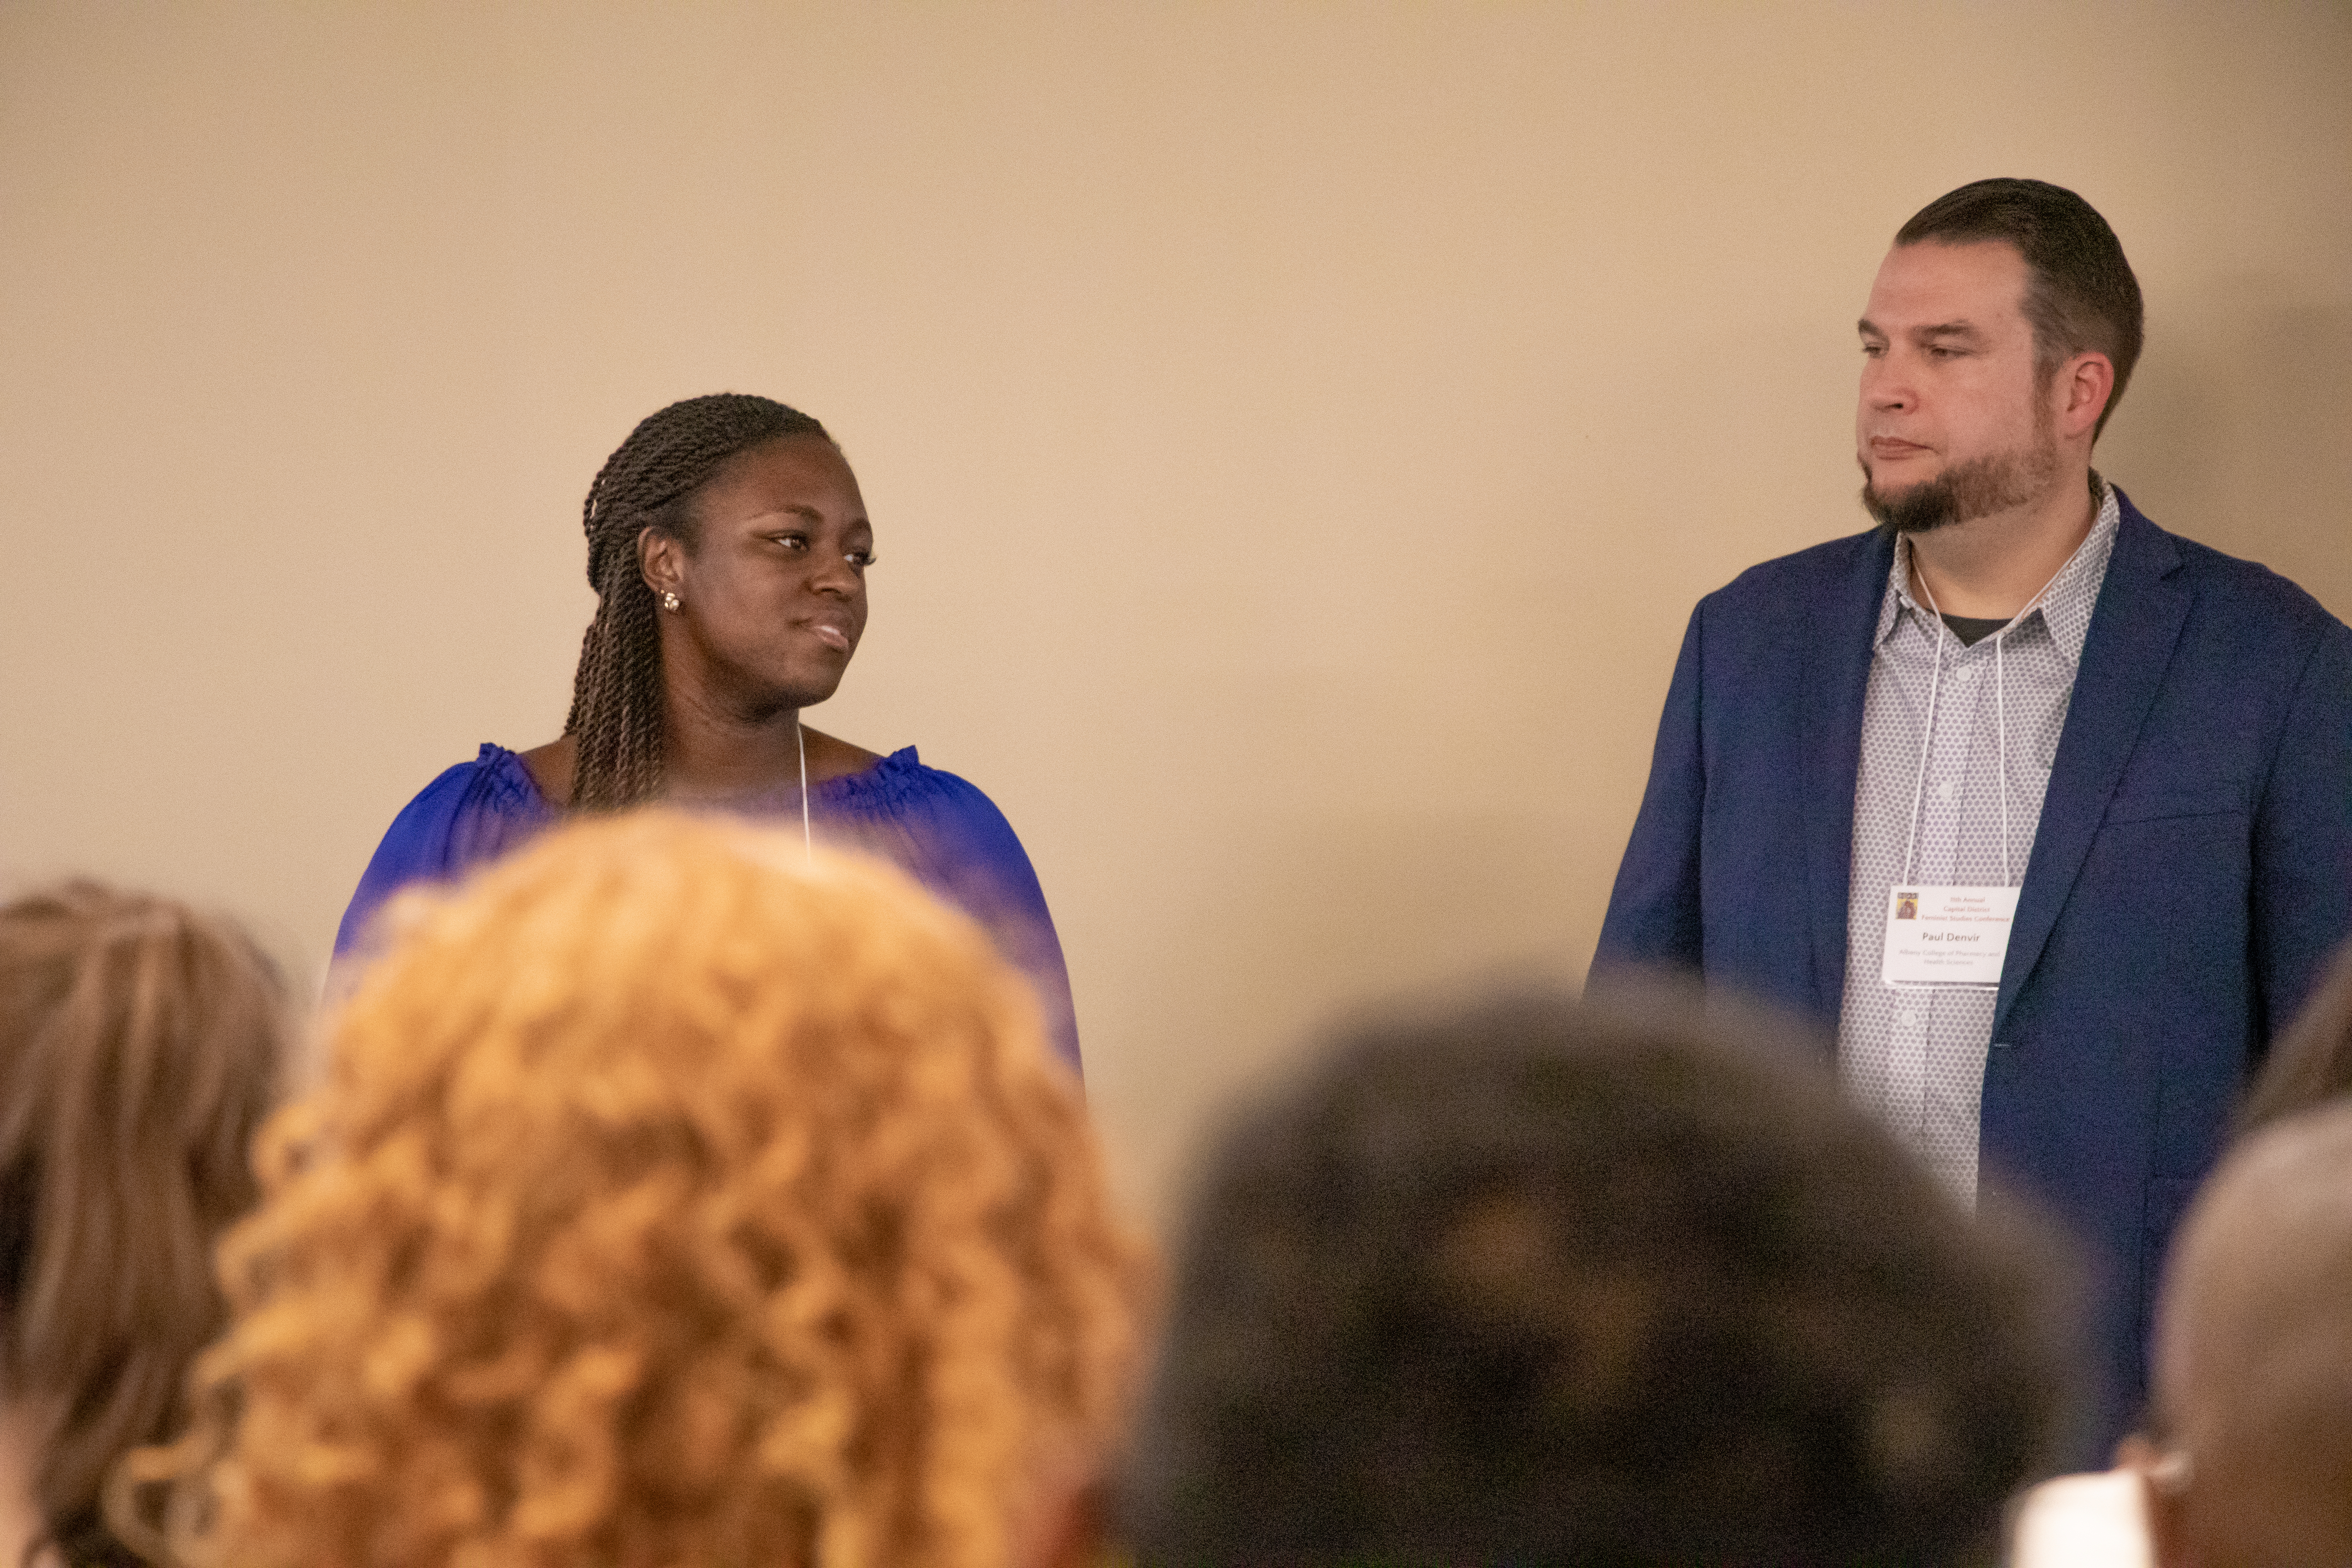 ACPHS Student Britney Mbeng and Associate Professor Paul Denvir present research at Feminist Conference